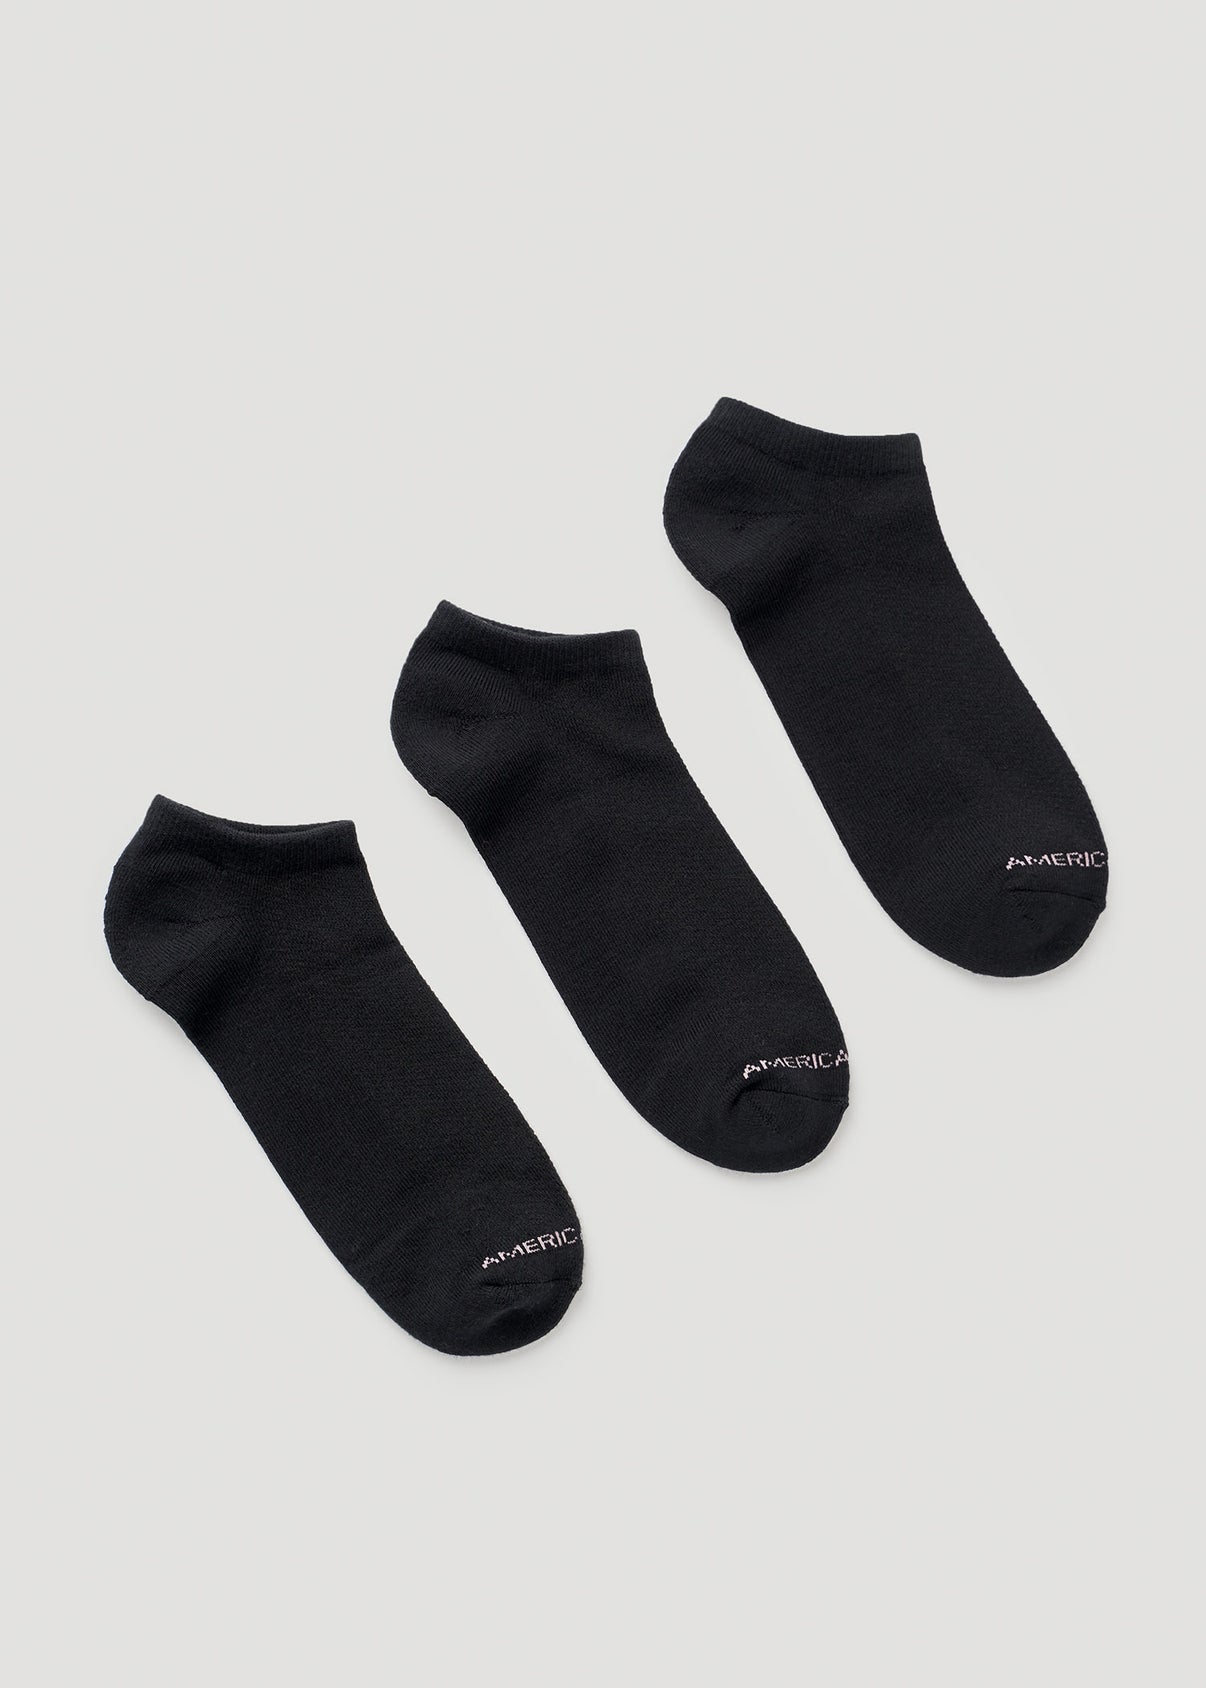 Women's Ankle Socks (X-Large Size: 10-13) | Black 3 Pack – American Tall